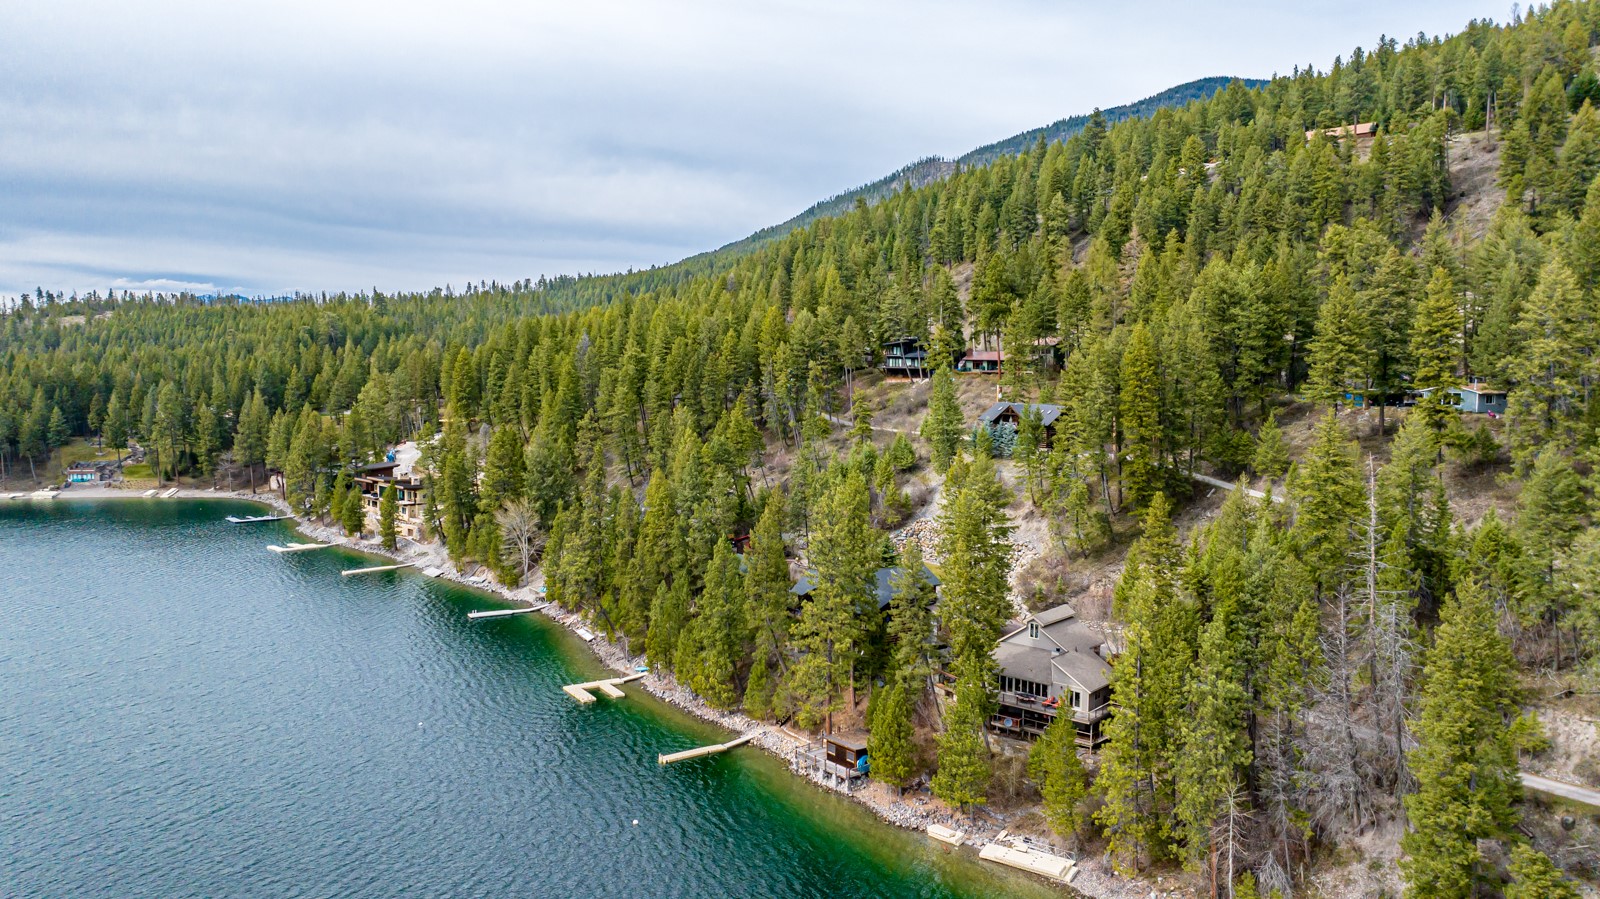 Whitefish Lake! Perched on the shores of Whitefish Lake on just over half an acre and providing unrivaled, serene Whitefish Lake and mountain views. This 4-bedroom + office, 2-bathroom, cozy lakeside cabin is offered fully furnished and turnkey, where comfort and luxury meet with warm natural light spilling into nearly every corner. 103 feet of PRIME, unspoiled Whitefish Lake frontage, and a private dock gift you with endless days of boating, swimming, and watersports right from your doorstep. The extensive and gorgeous outdoor living space was made for al fresco dining, lounging, and soaking up the perfect Montana summers. Enjoy all of what Whitefish has to offer, where 4 seasons of recreation await. Experience the epitome of lakeside living! Call Matt Buckmaster (406)261-8350 or your real estate professional for more information.